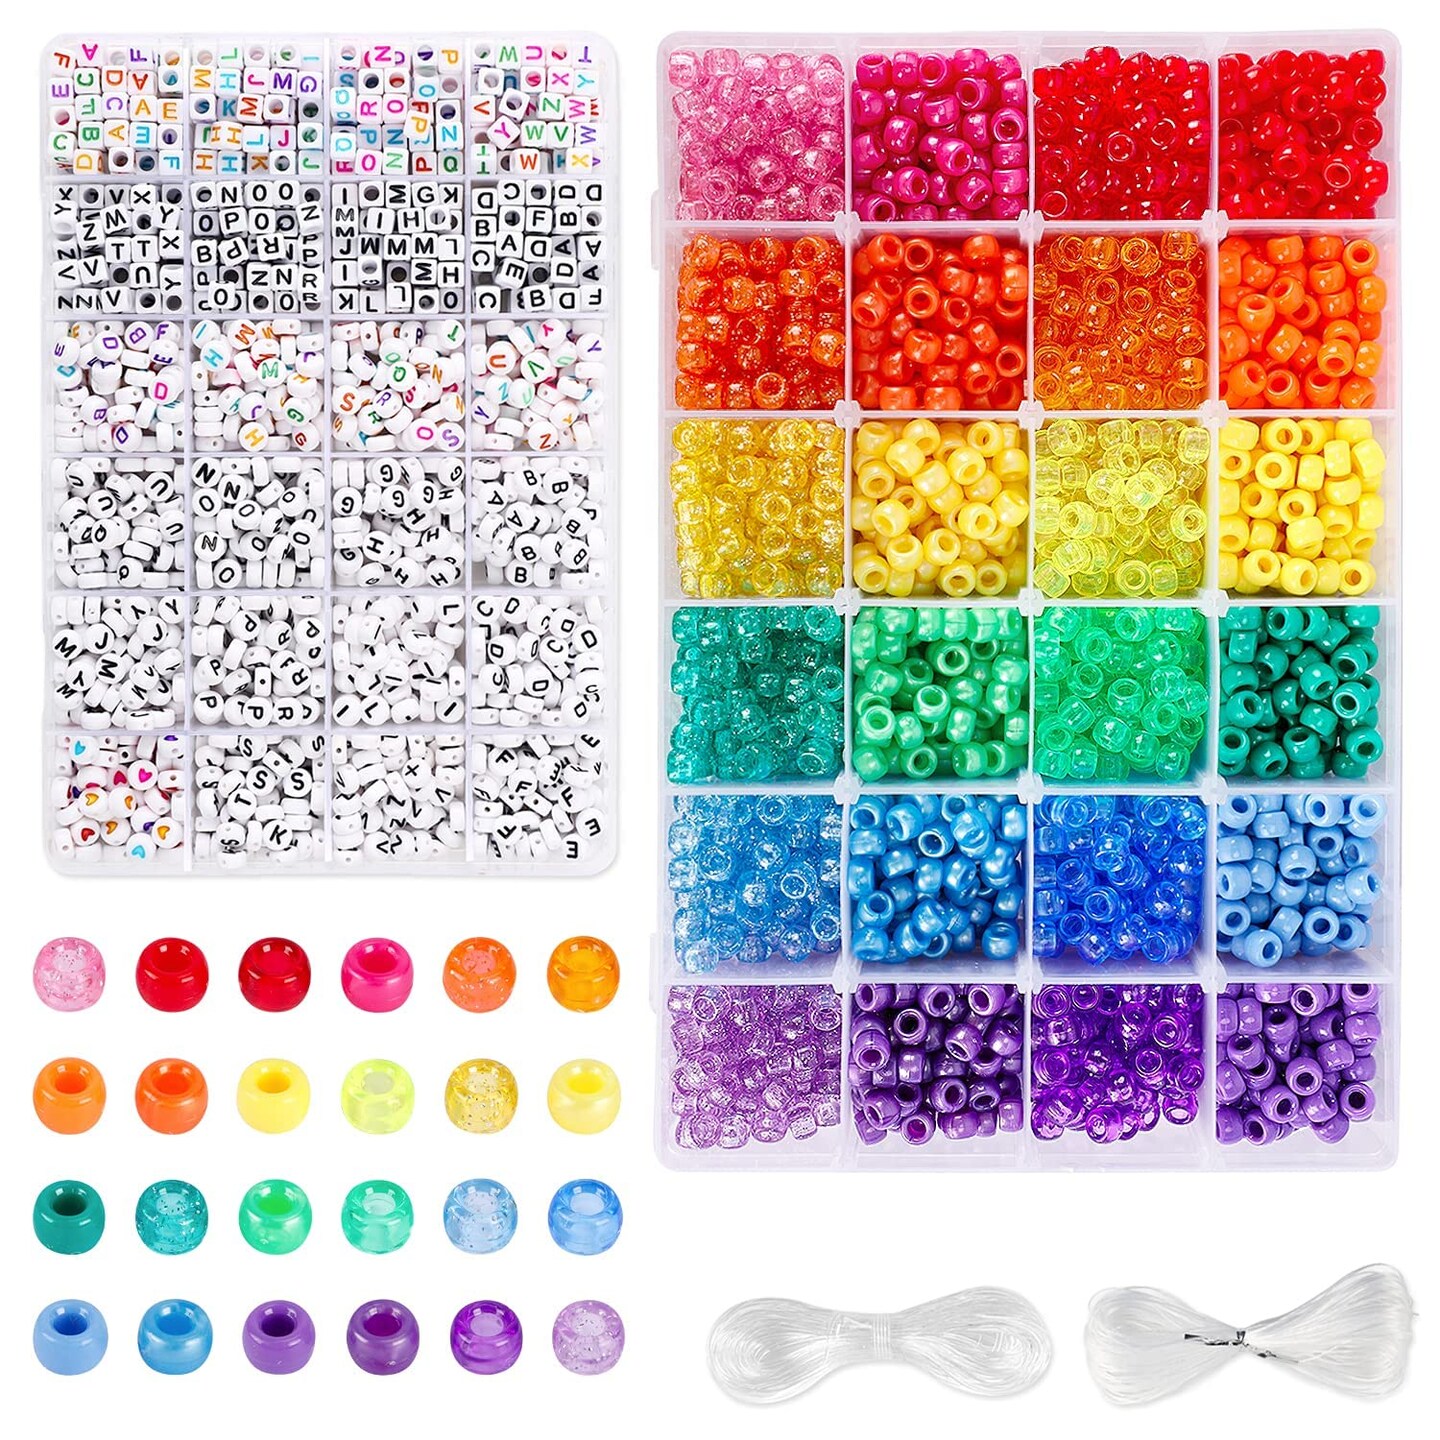 4000Pcs Pony Beads Kit, 2400Pcs Rainbow Kandi Beads And 1600Pcs Letter Beads, 24 Colors Plastic Craft Beads Bulk For Bracelets Jewelry Making With 20M Crystal String And 30M Elastic String